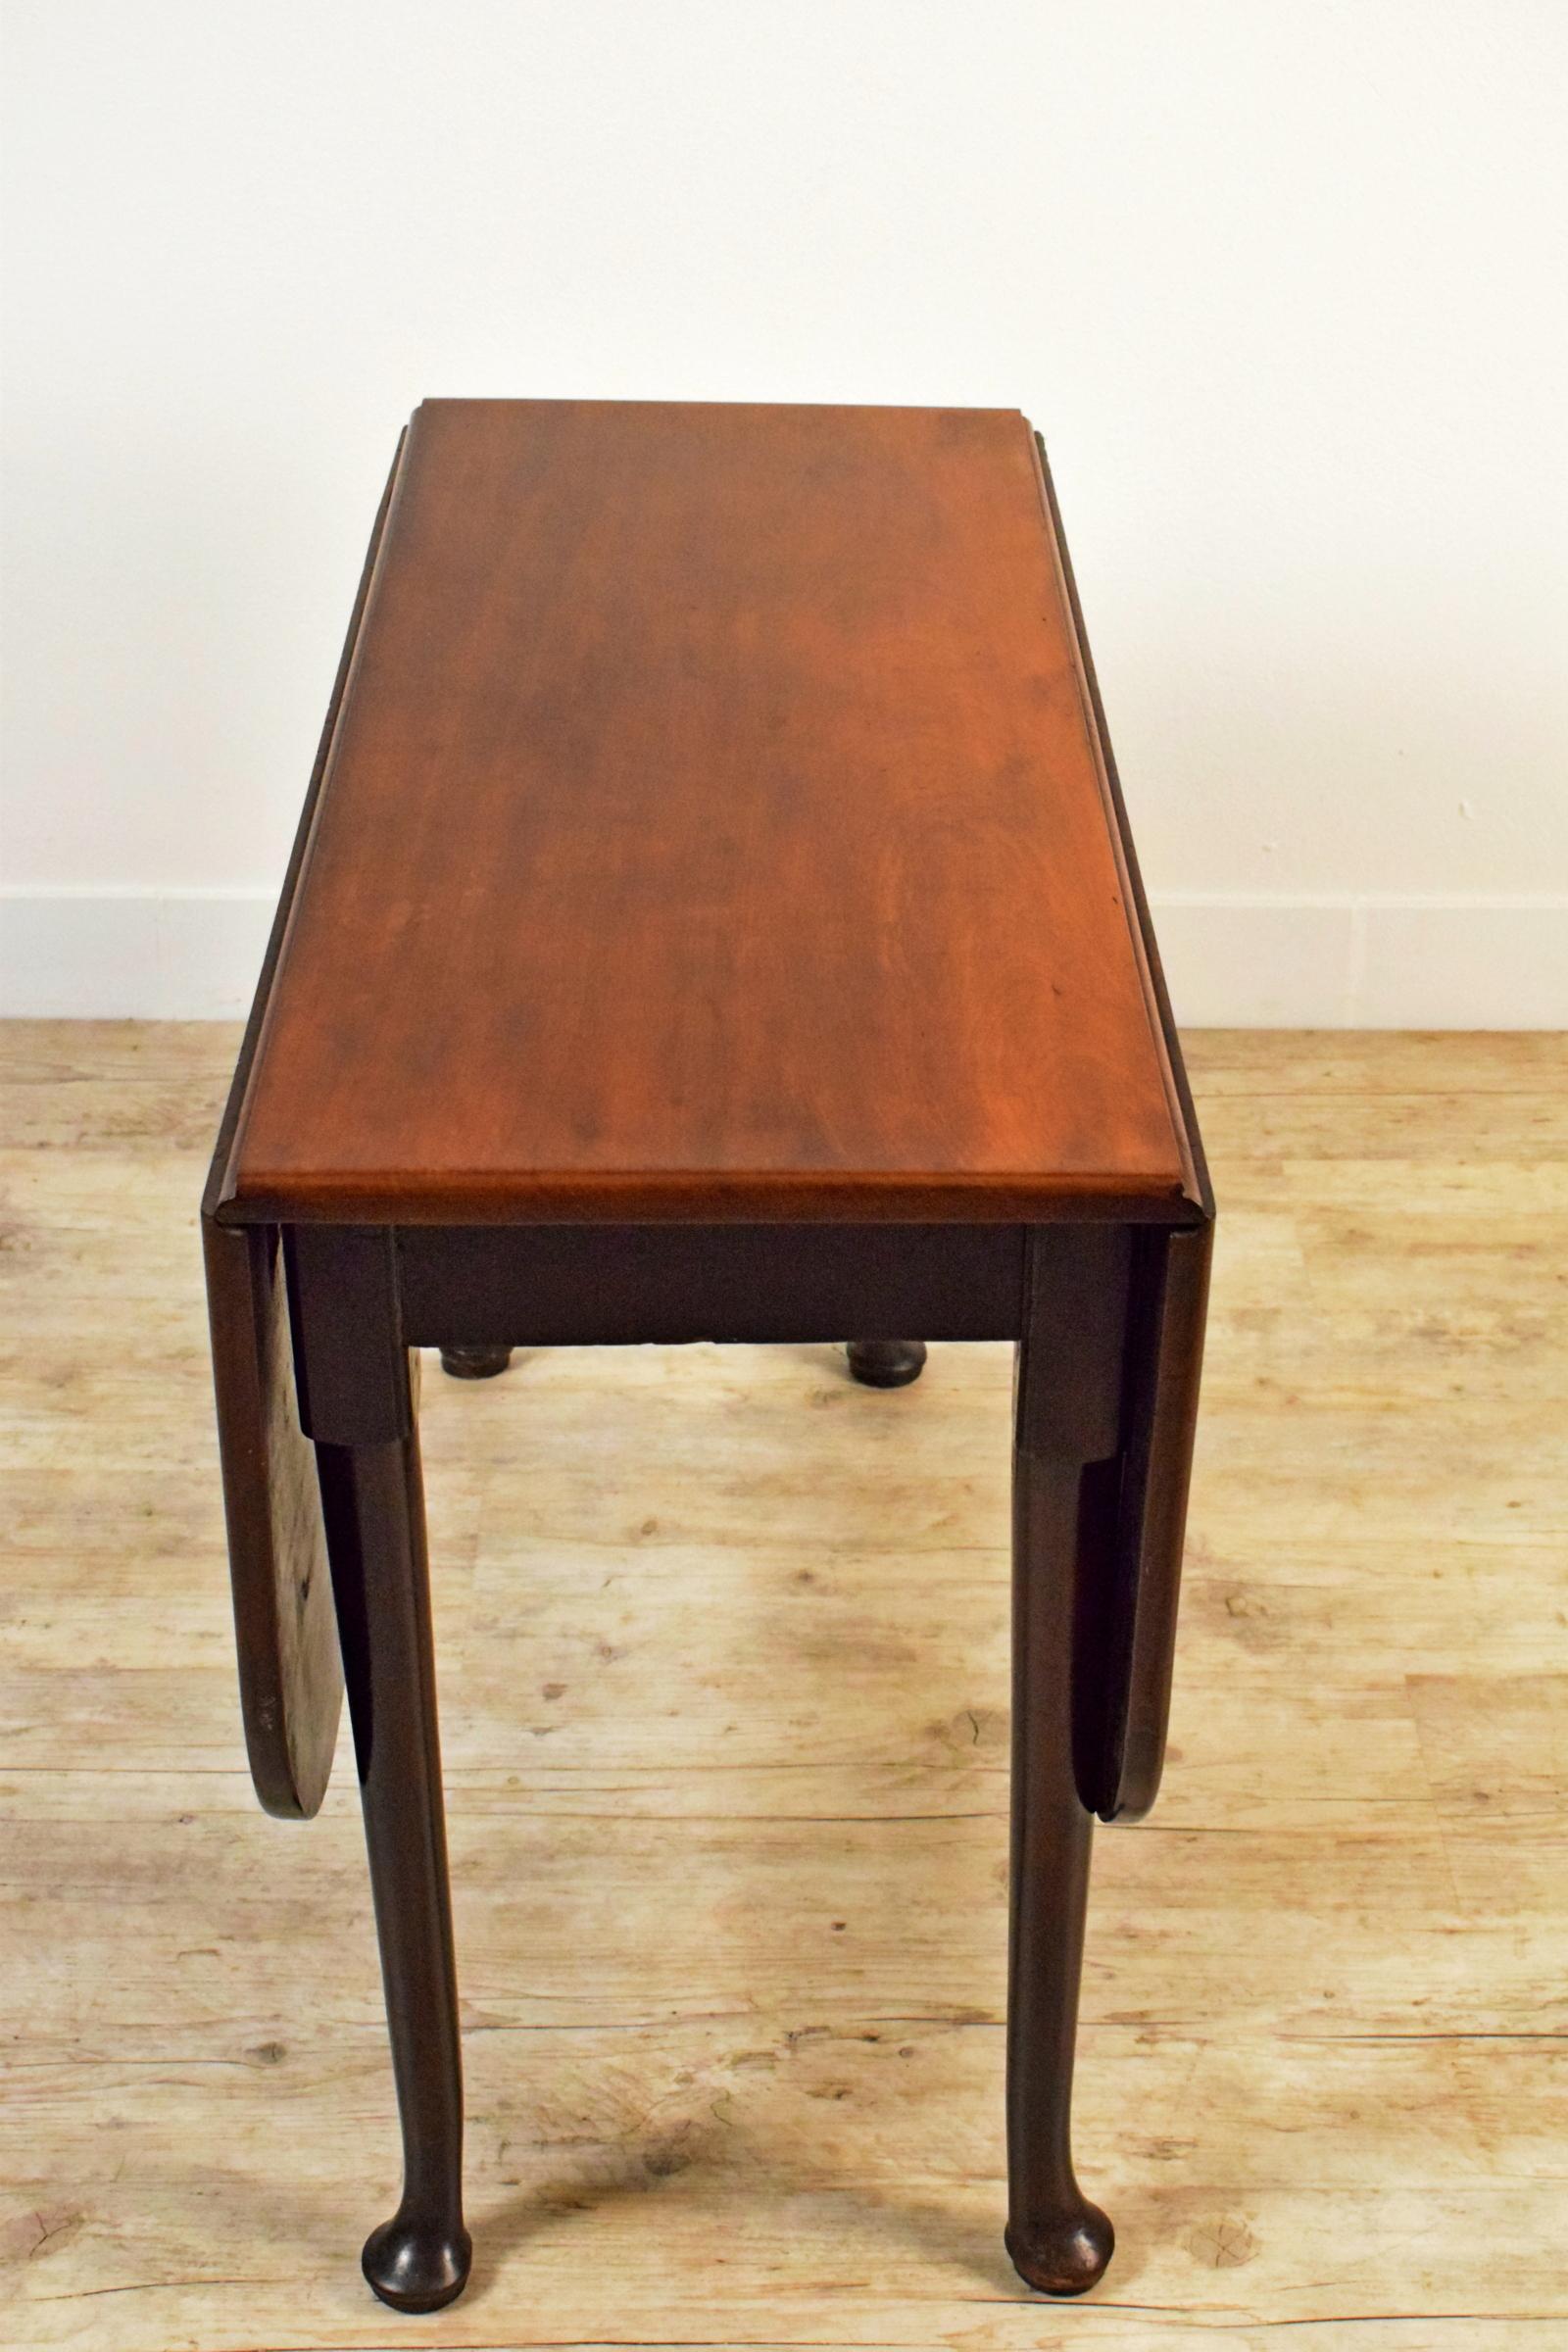 19th Century English Drop-Leaf Wood Table For Sale 1